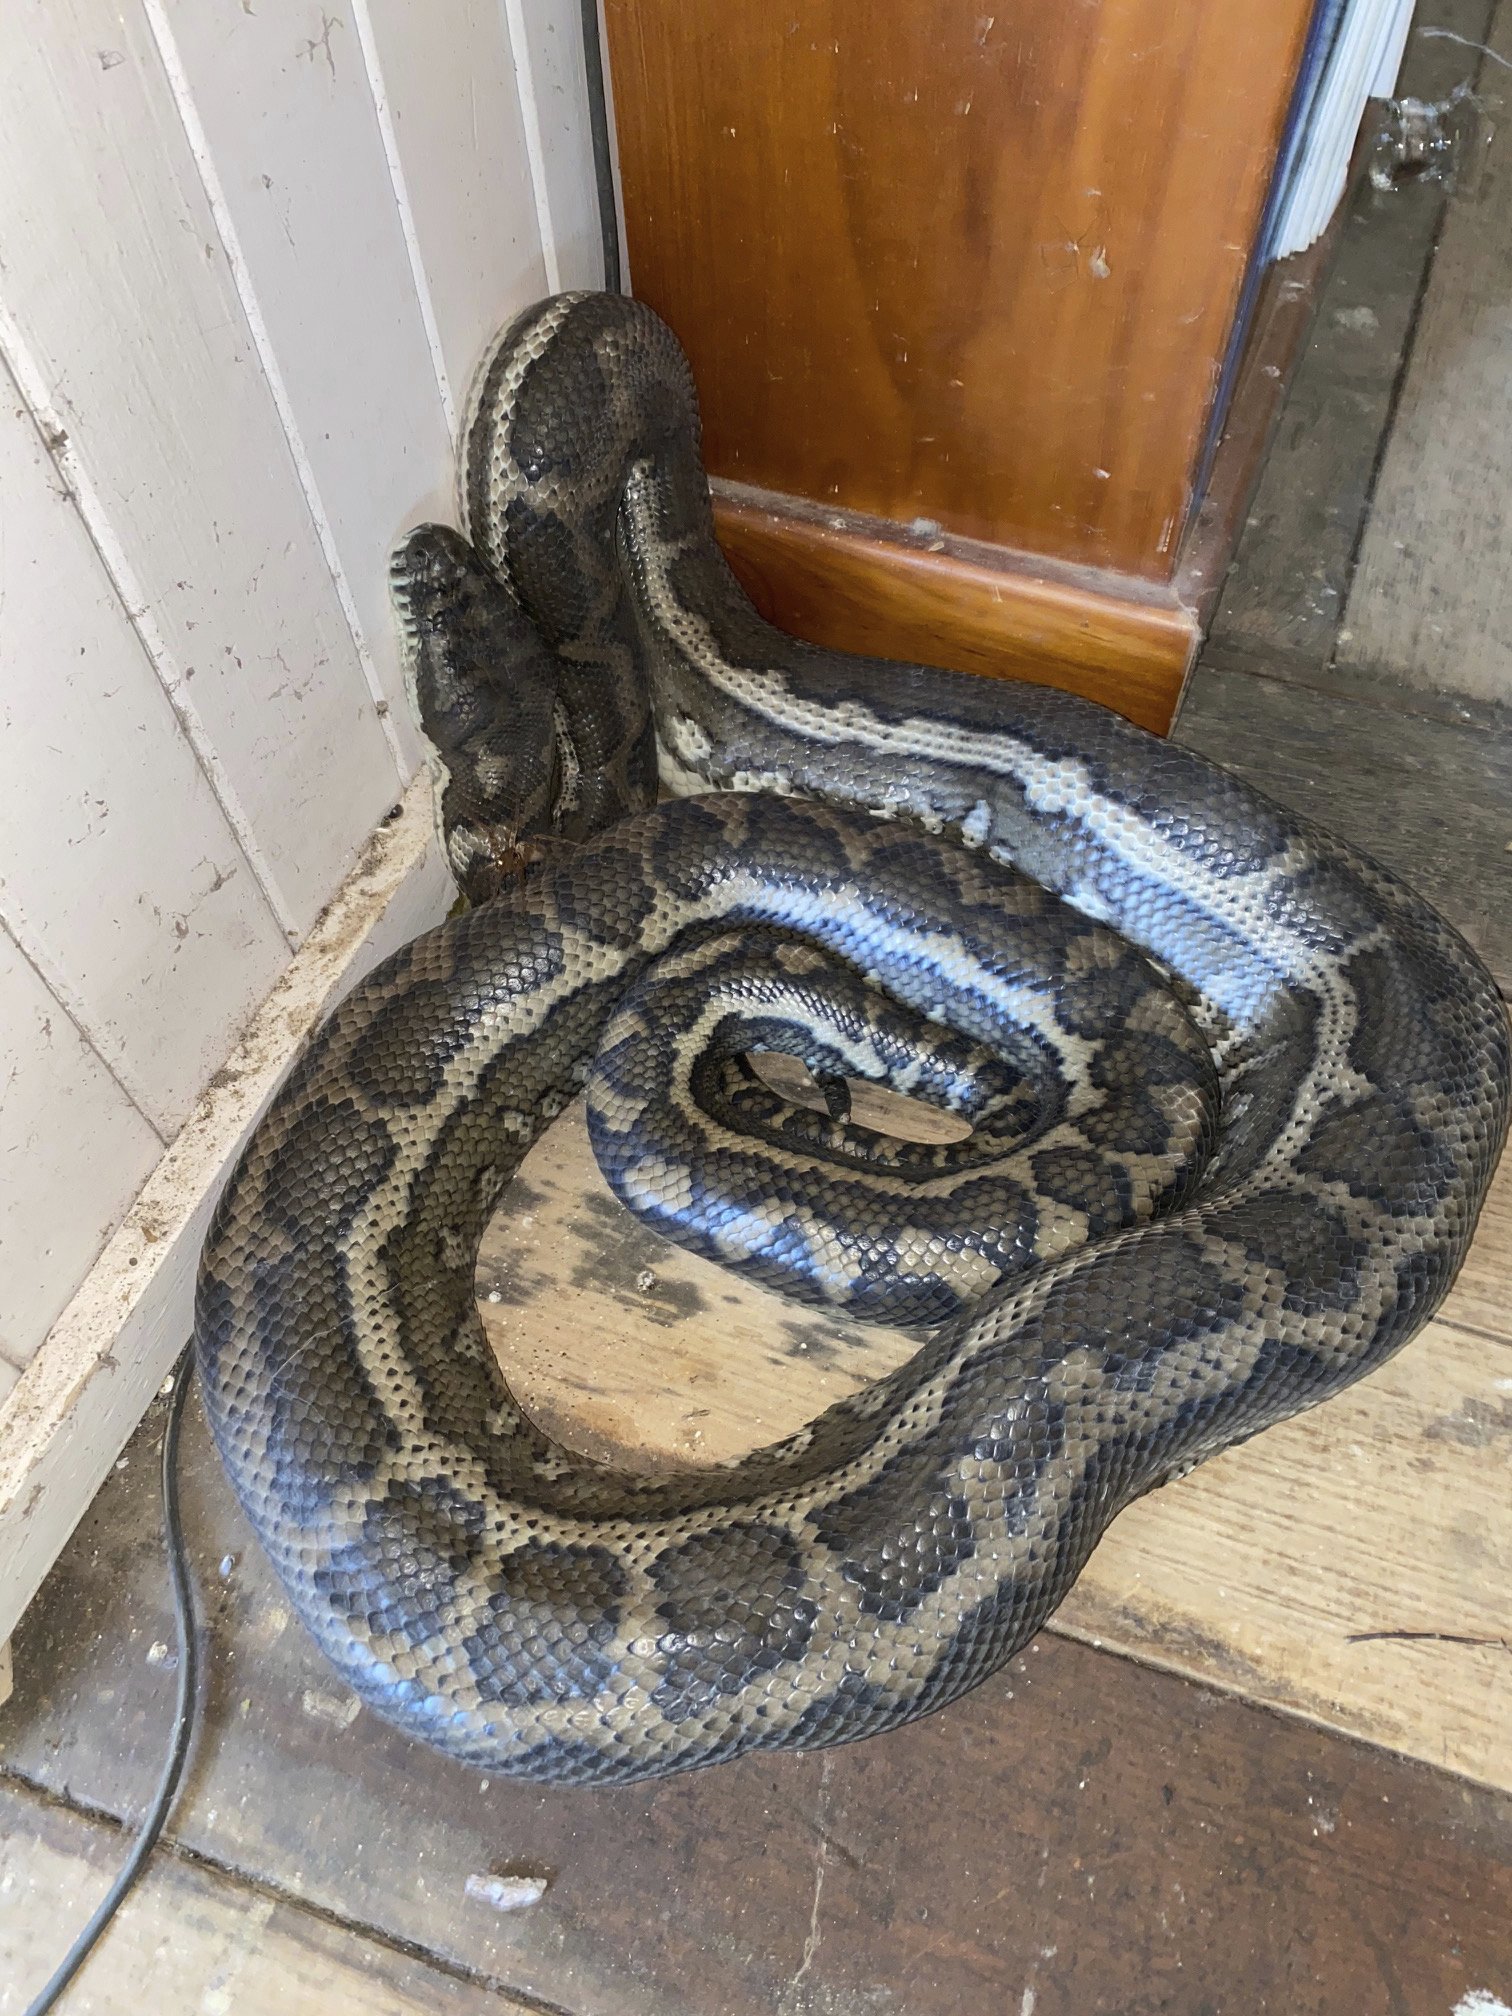 2 pythons weighing 100 pounds collapse ceiling in Australia | News